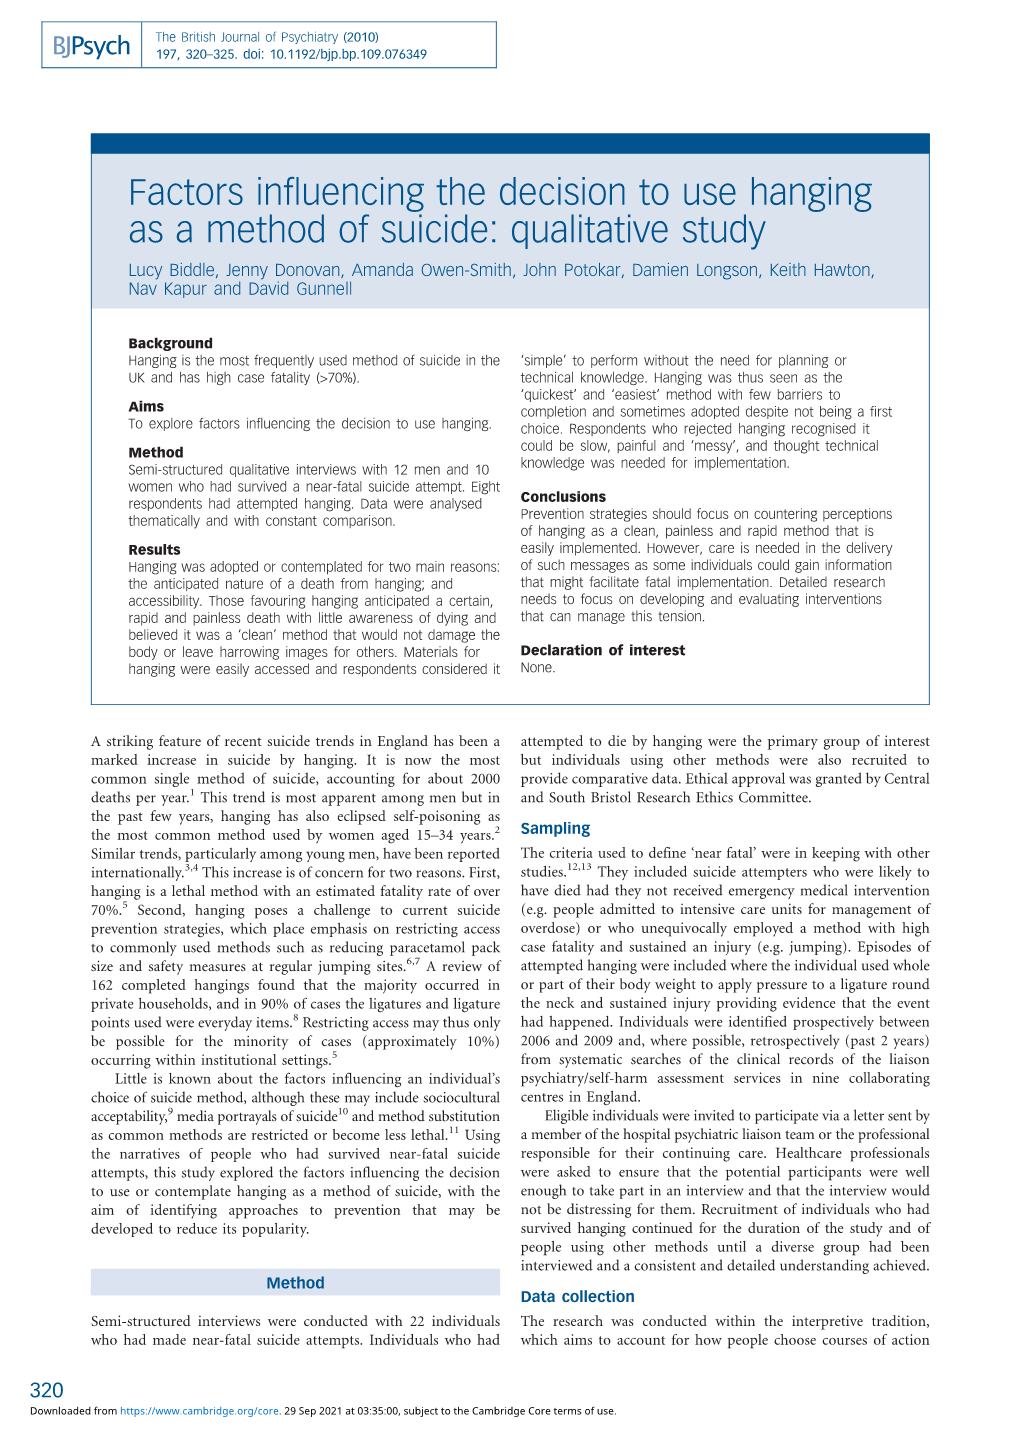 Factors Influencing the Decision to Use Hanging As a Method of Suicide